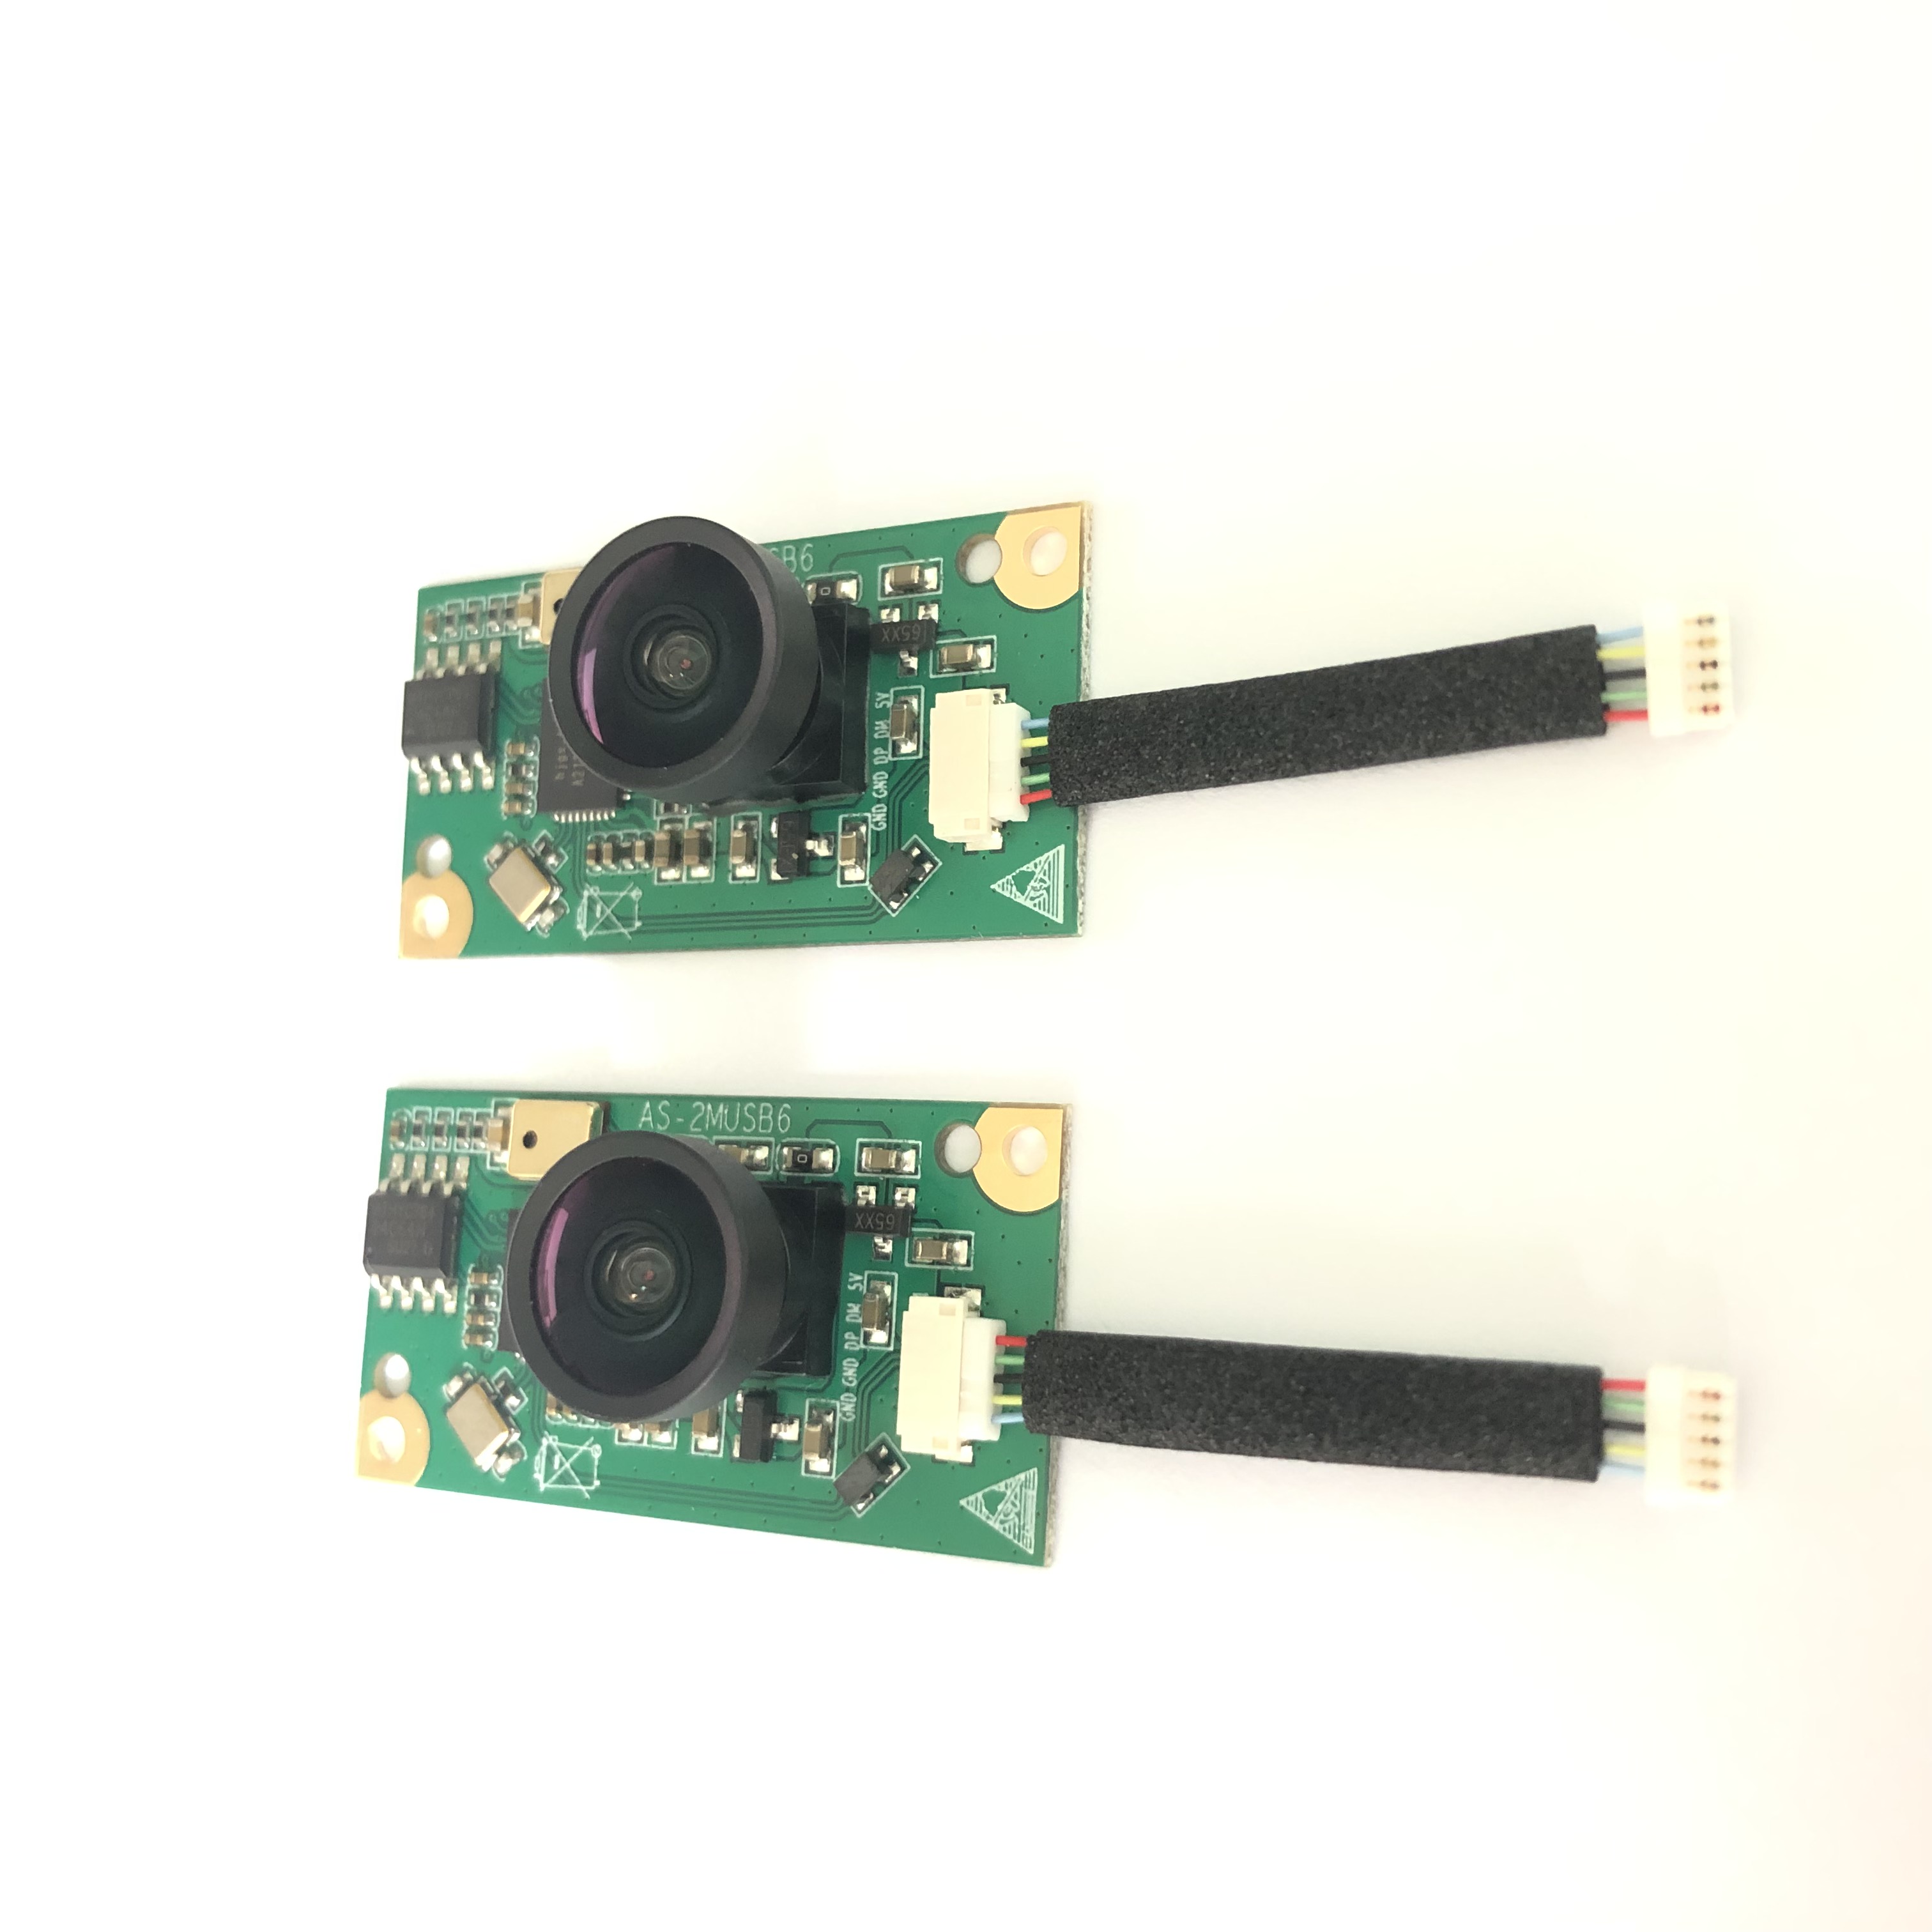 China Factory for Imx219 - Manufacturers USB Camera Module 200w usb 150 degree camera module For Linux – Ronghua